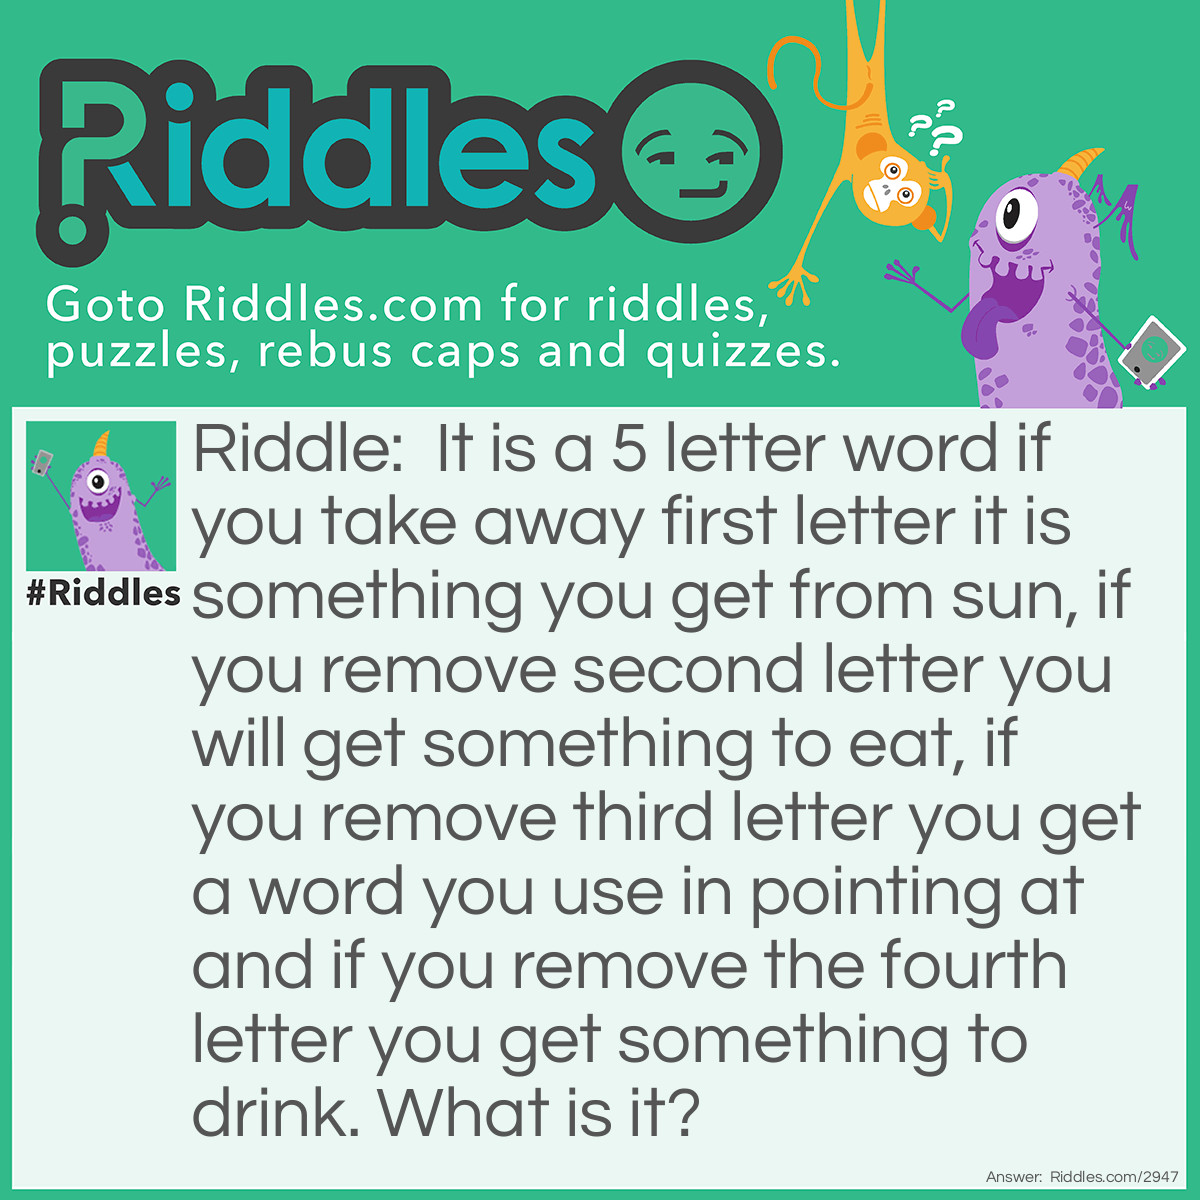 Riddle: It is a 5 letter word if you take away first letter it is something you get from sun, if you remove second letter you will get something to eat, if you remove third letter you get a word you use in pointing at and if you remove the fourth letter you get something to drink. What is it? Answer: Wheat.